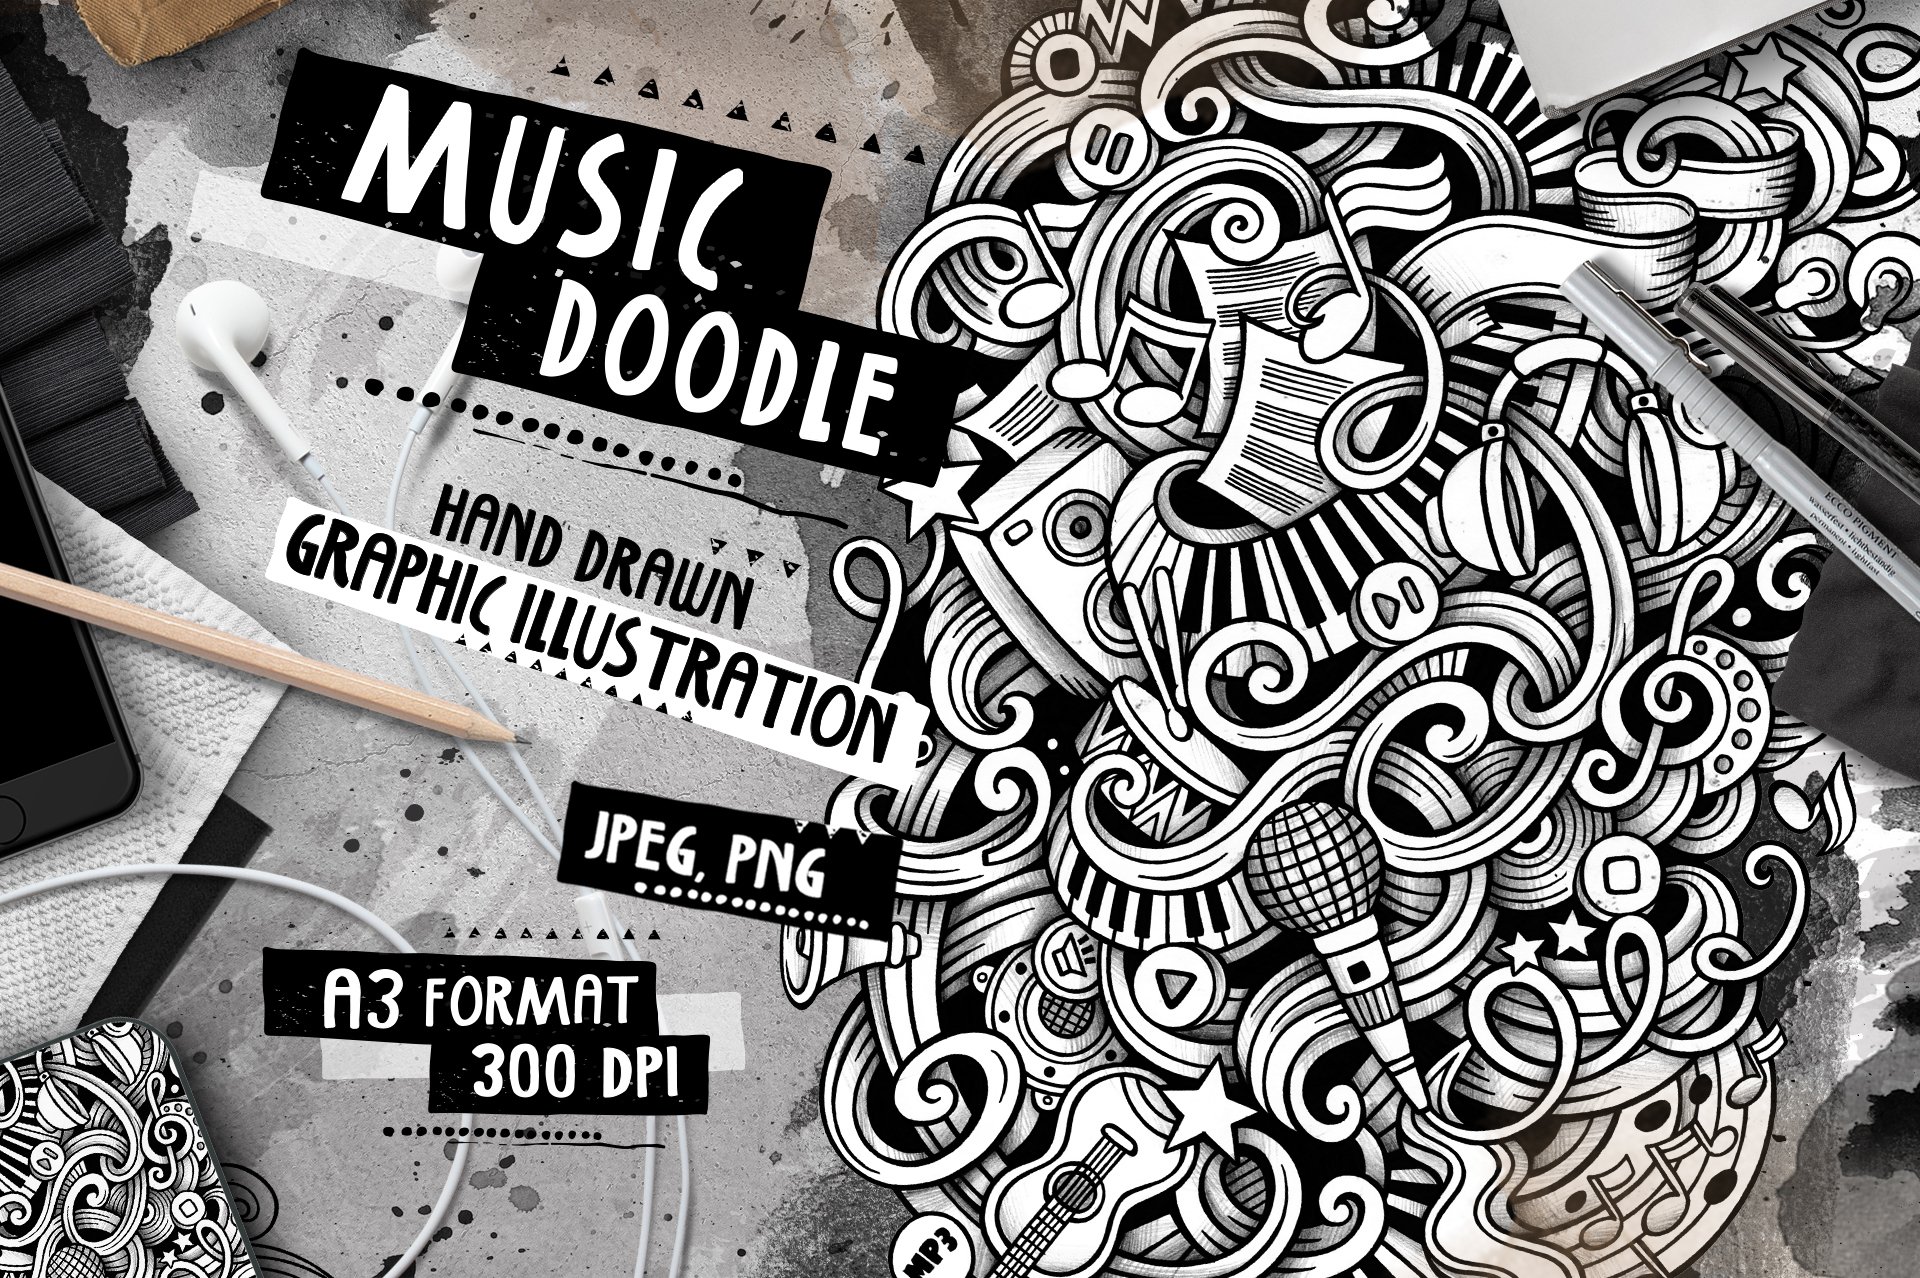 Music Graphic Doodle Illustration cover image.